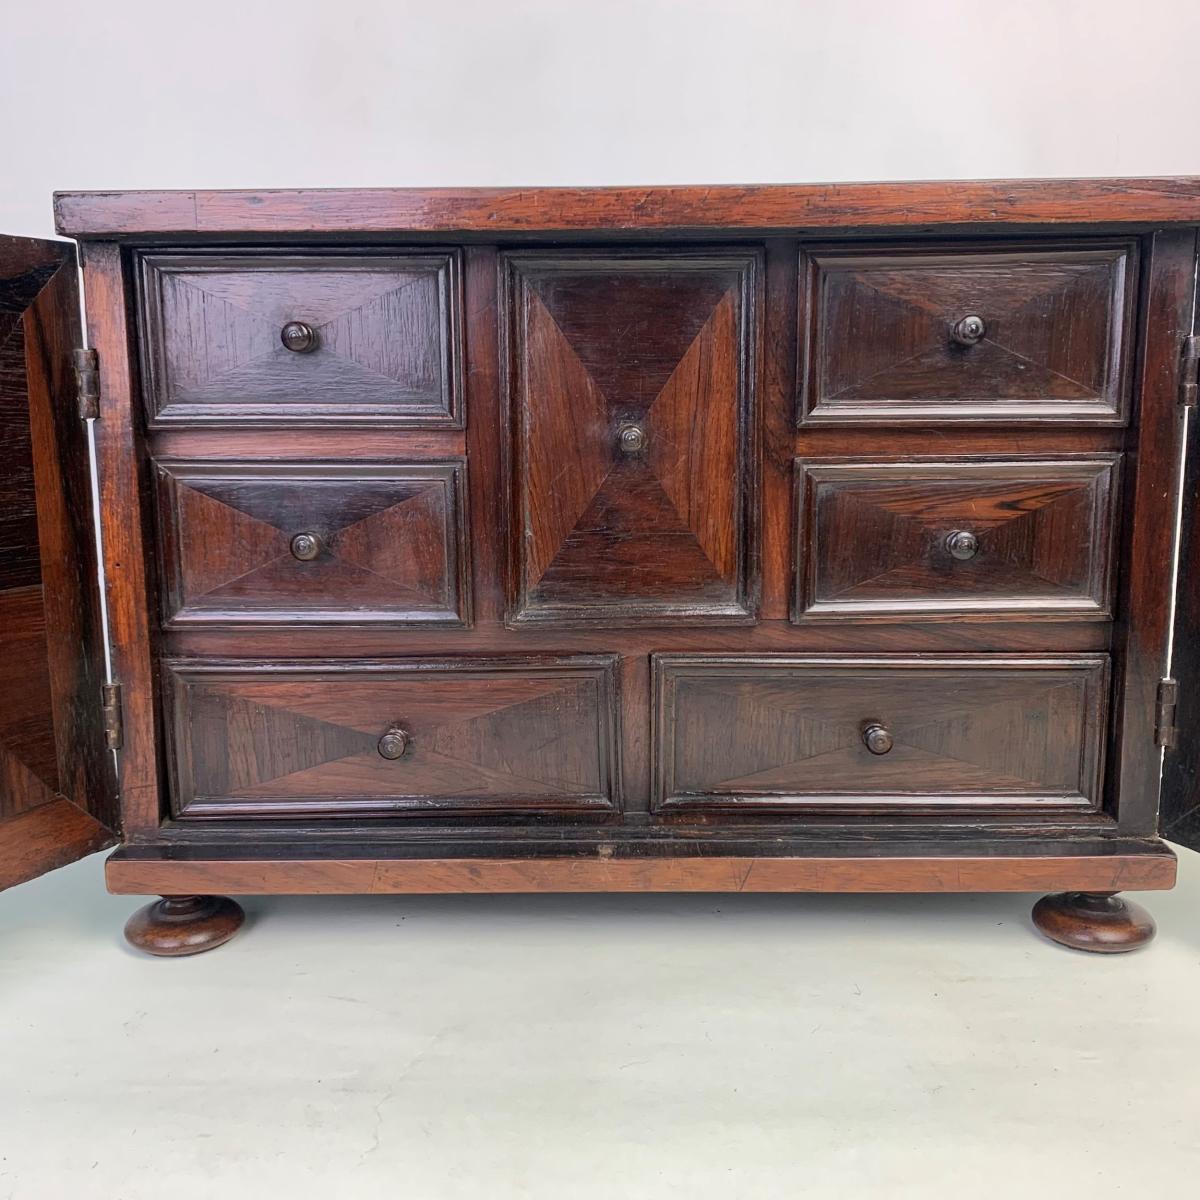 George I Rosewood Table / Spice cabinet